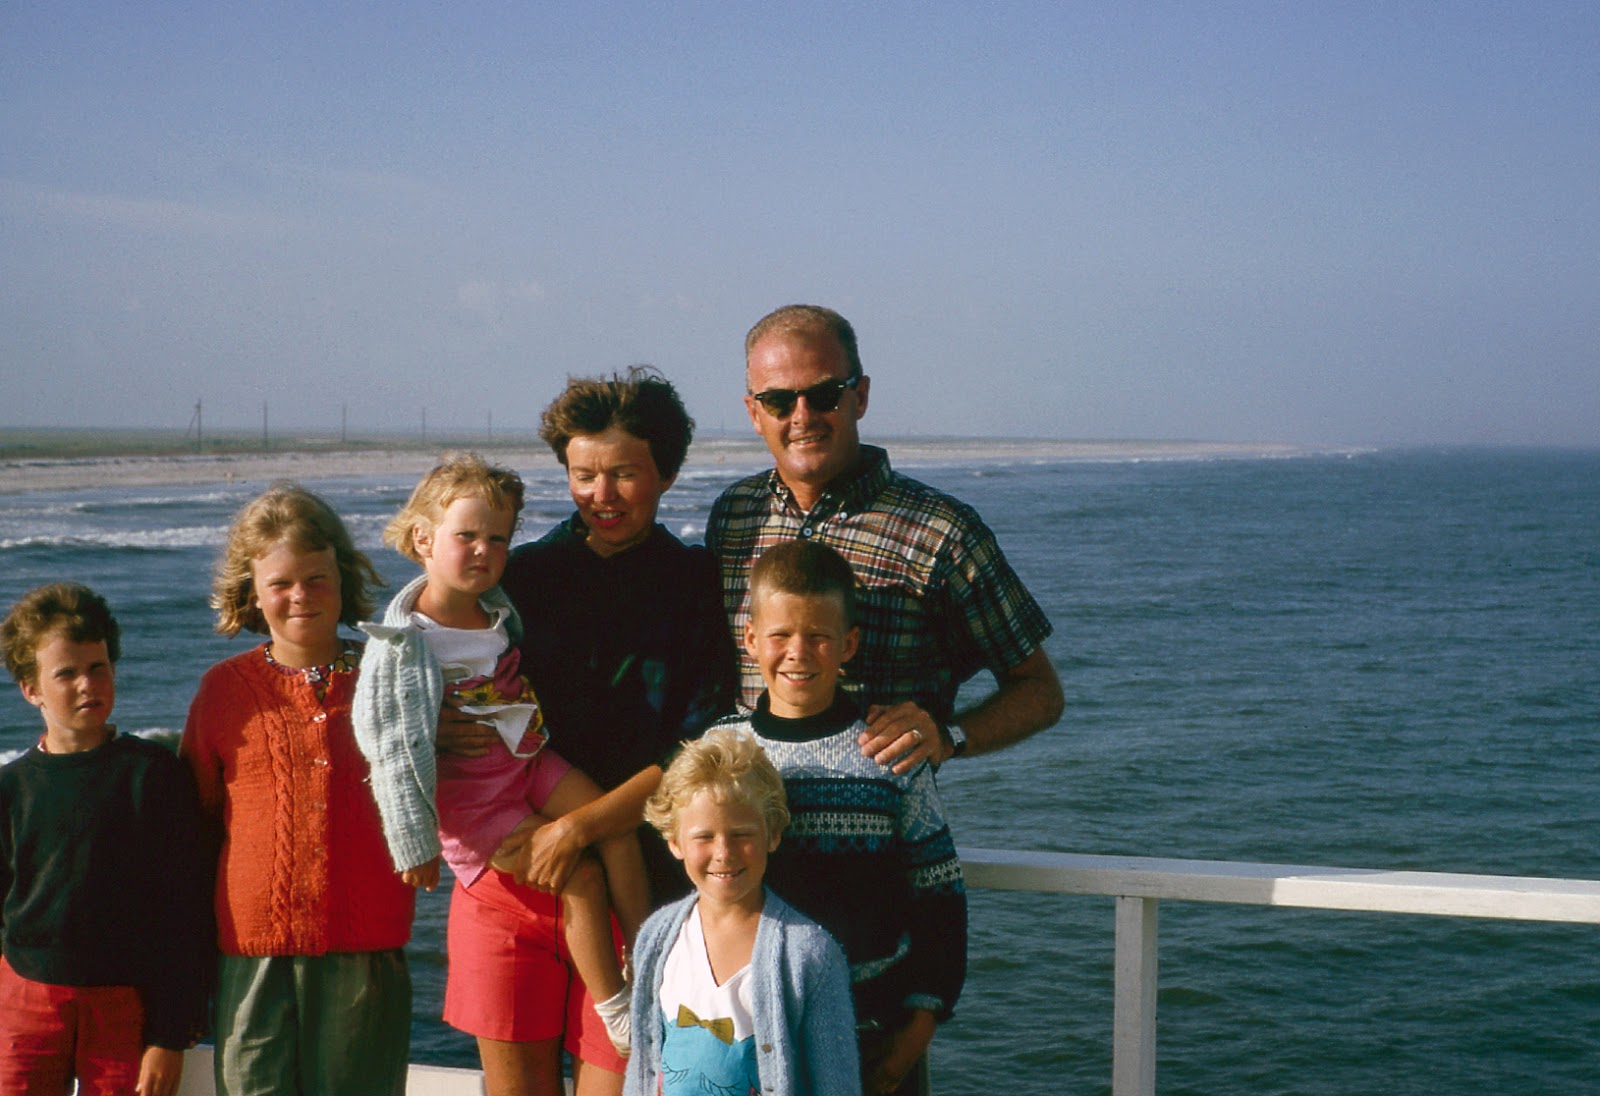 A family of seven posing for a photo in front of a body of water.